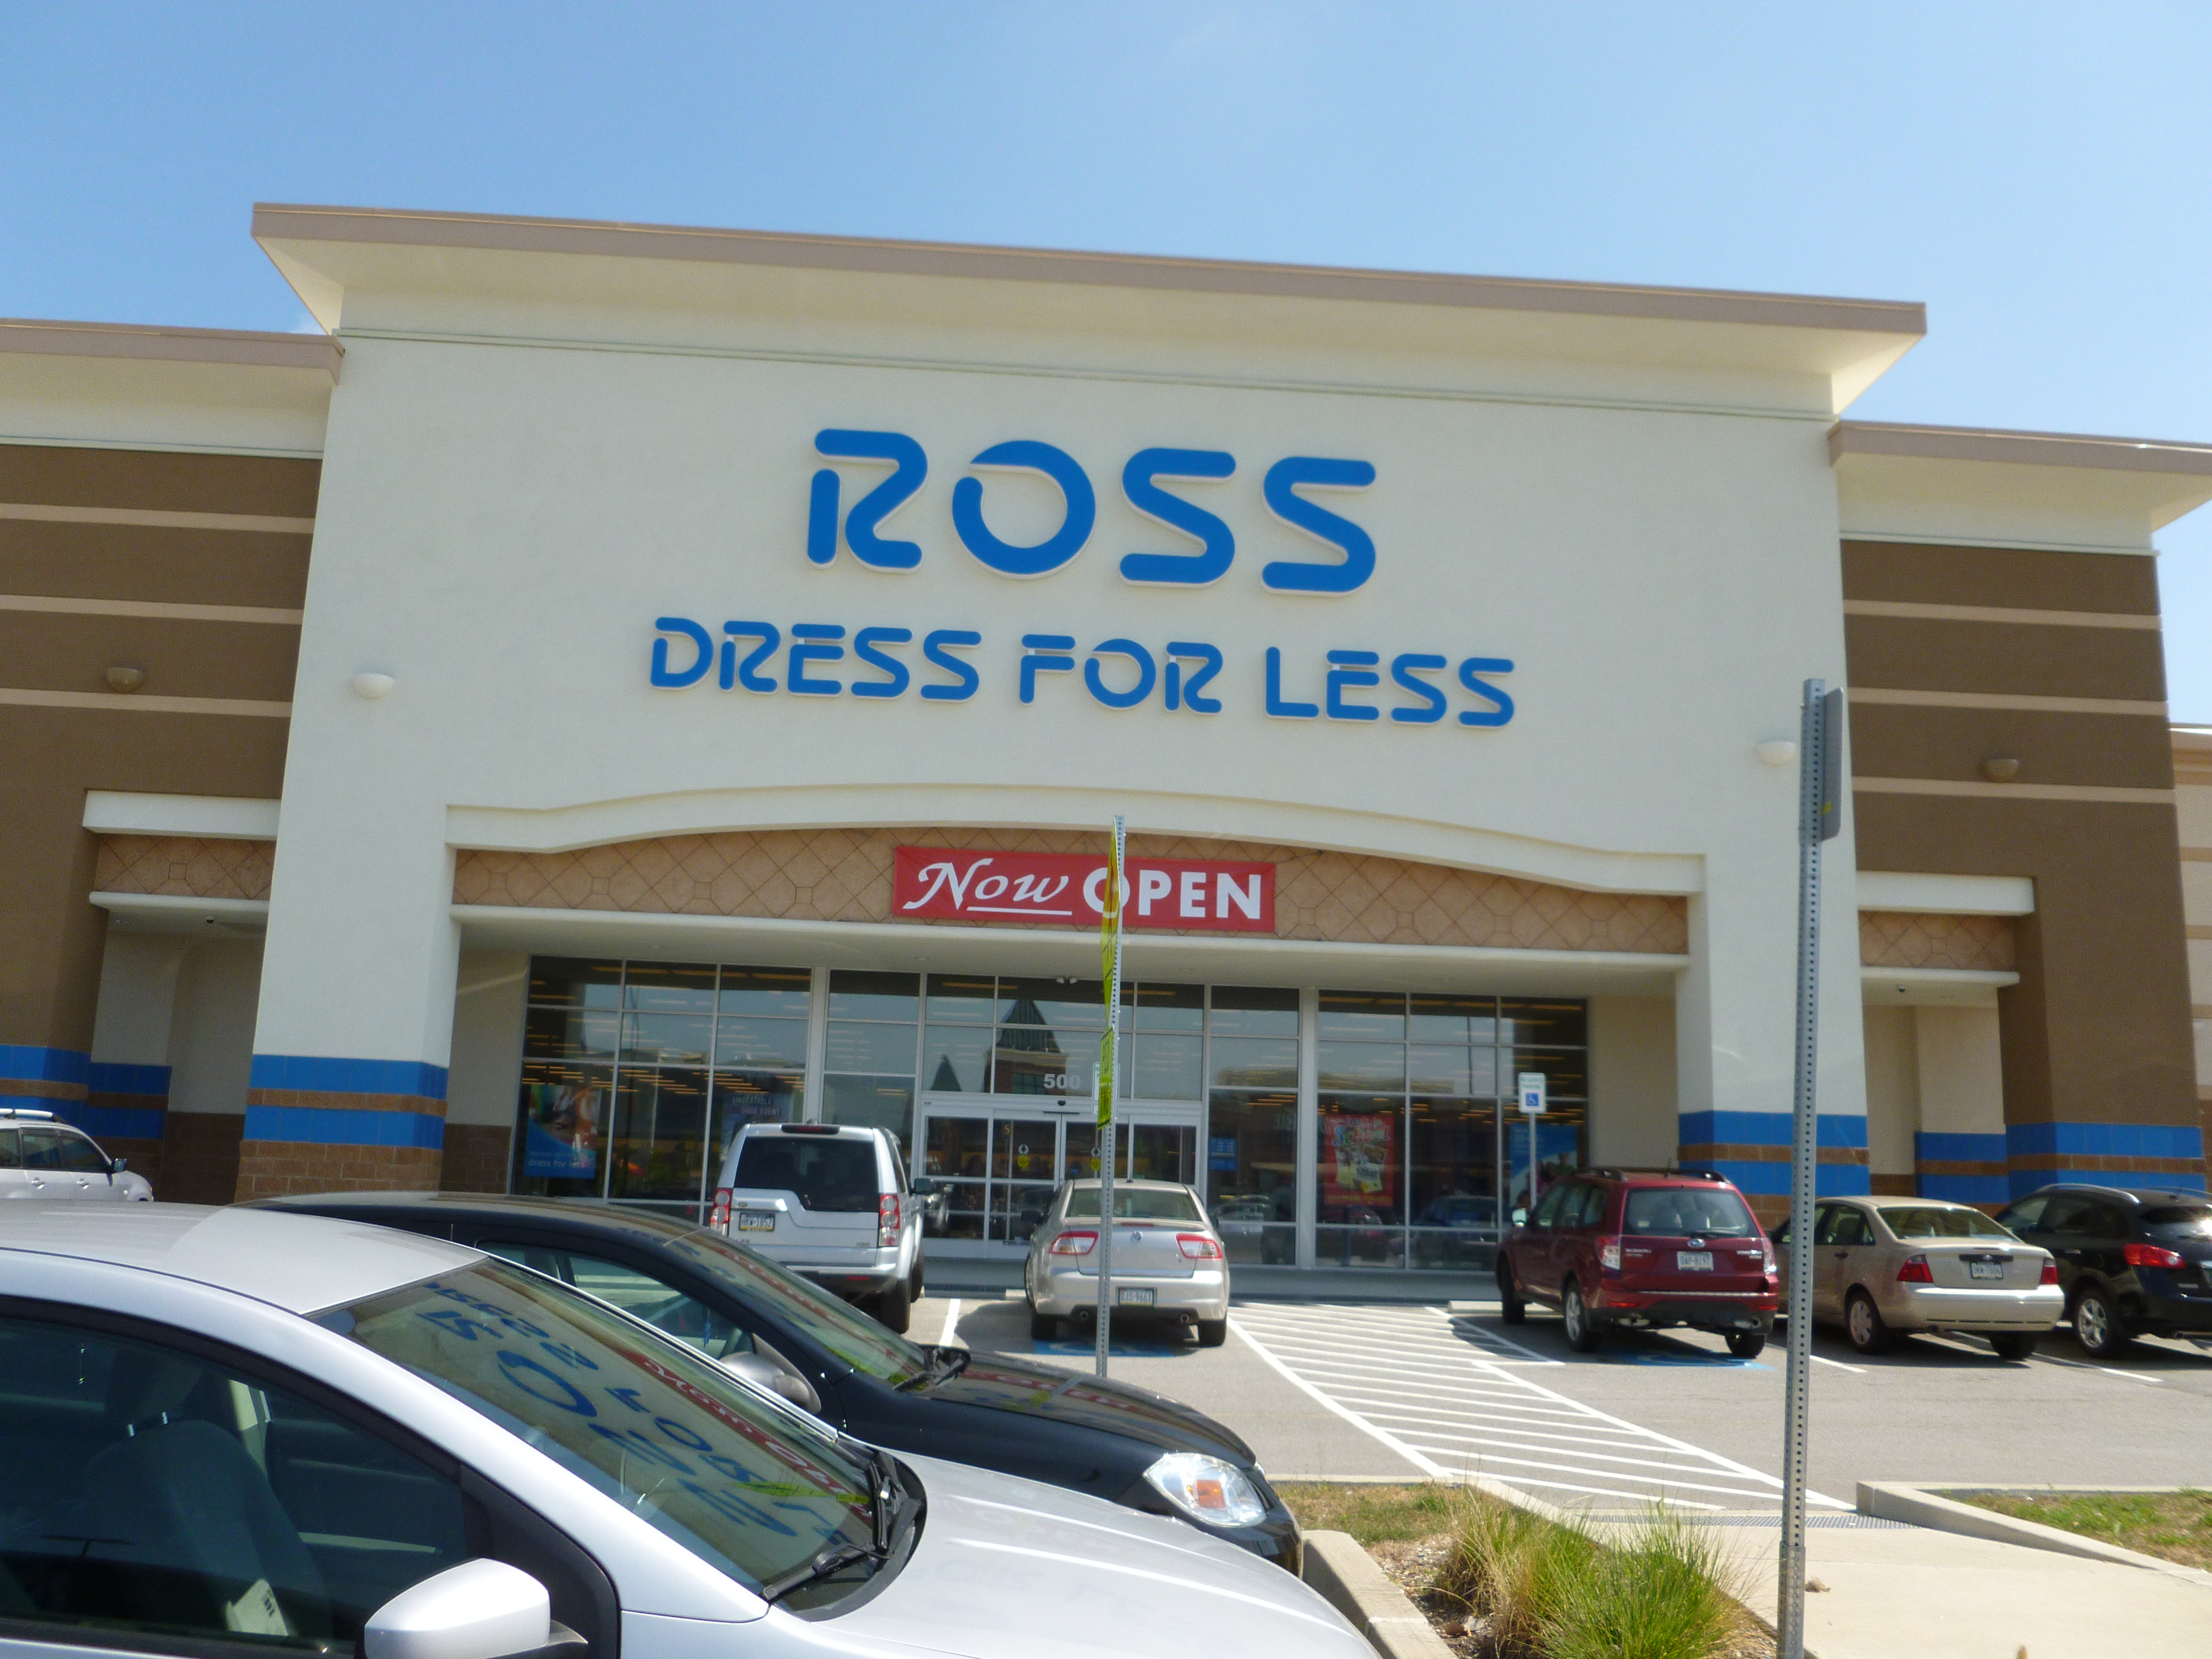 cheapest clothes store near me